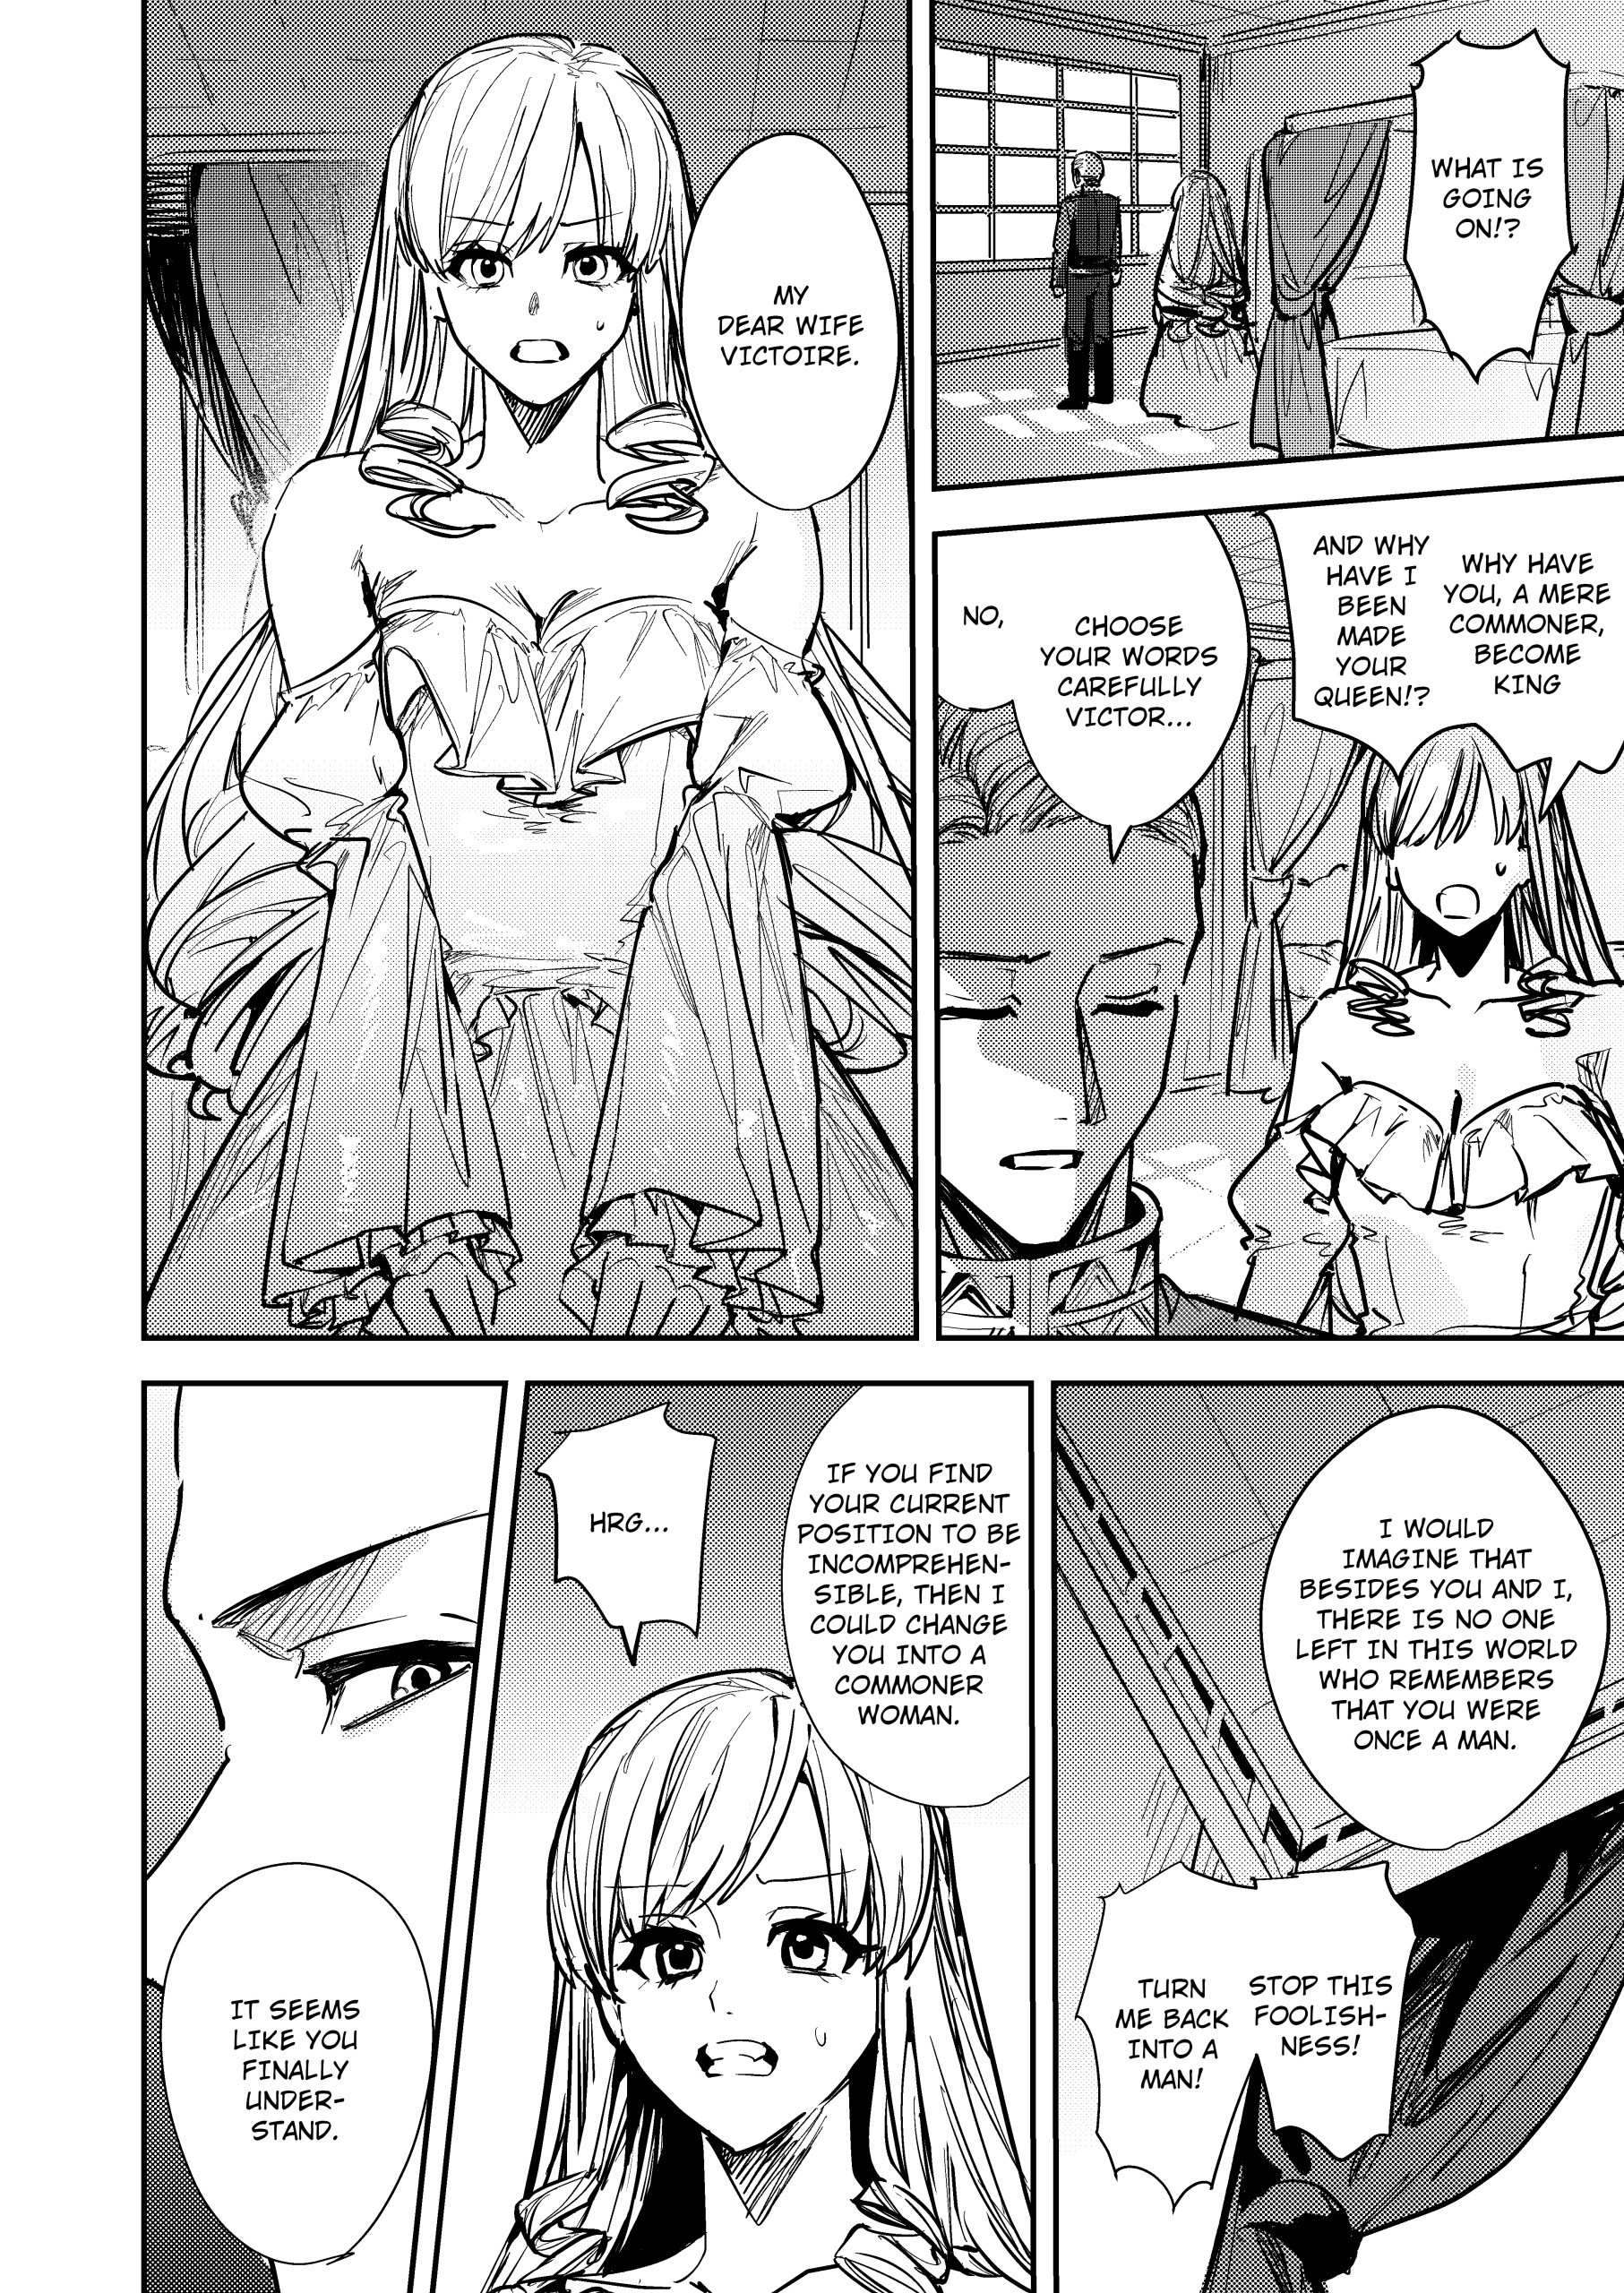 My Stolen Place -Transformed From King to Queen- hentai manga picture 9